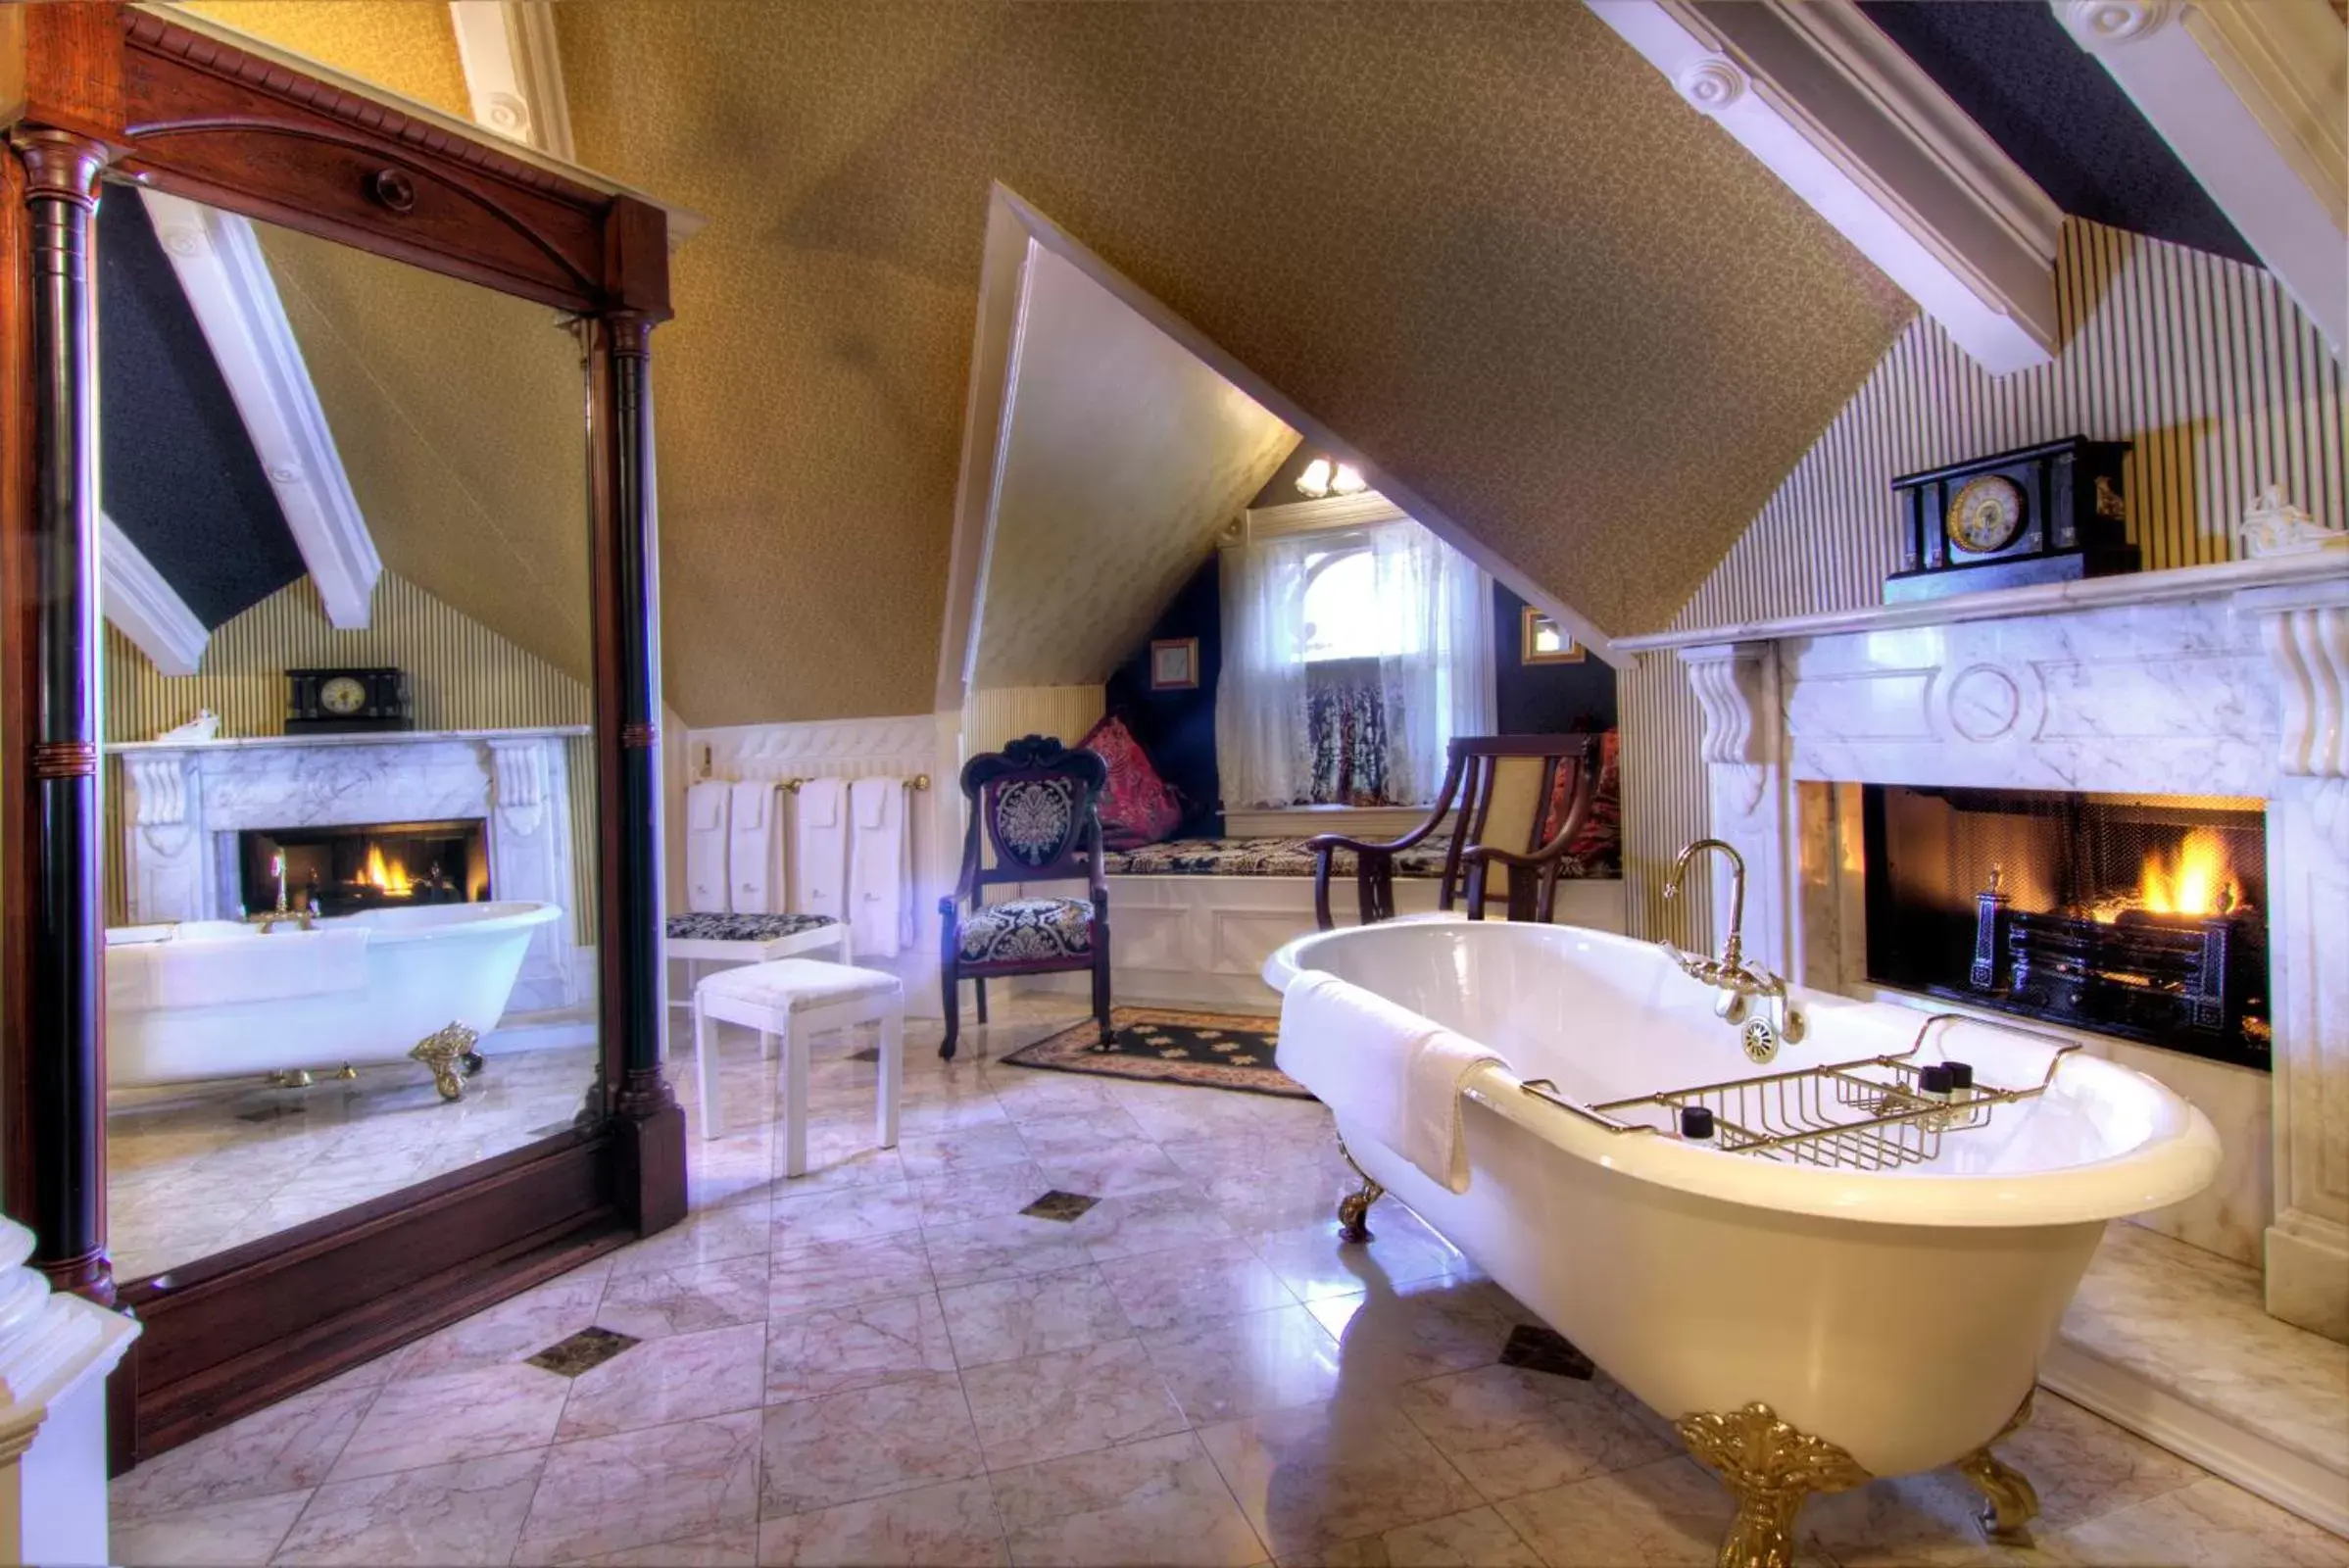 Day, Bathroom in Gingerbread Mansion